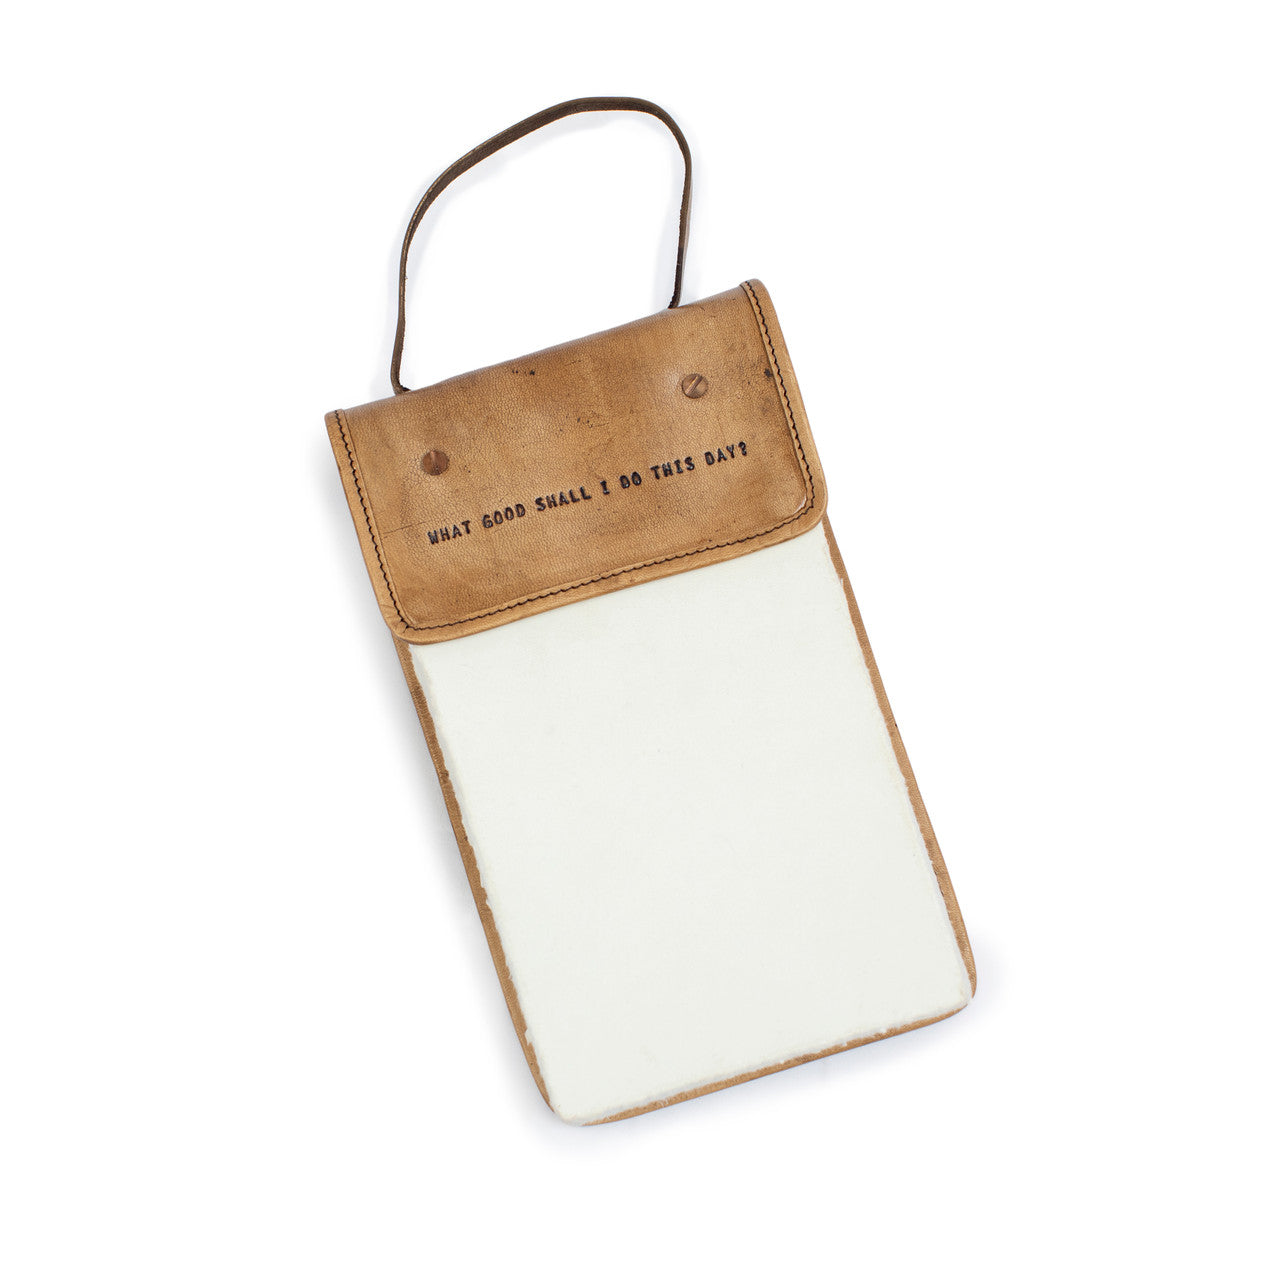 What Good Shall I Do This Day? Hanging Leather Journal